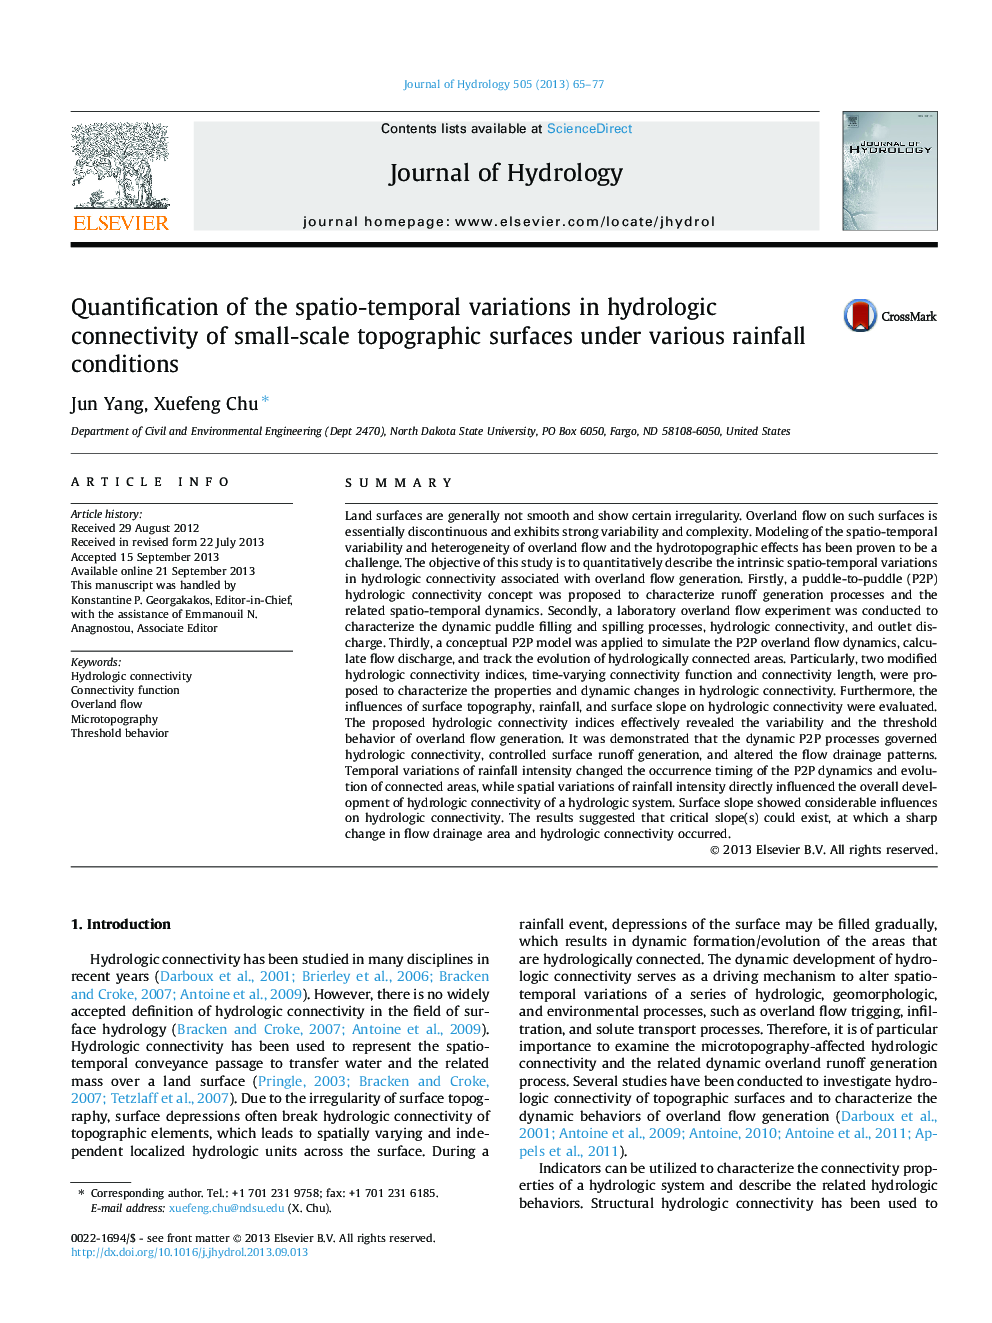 Quantification of the spatio-temporal variations in hydrologic connectivity of small-scale topographic surfaces under various rainfall conditions